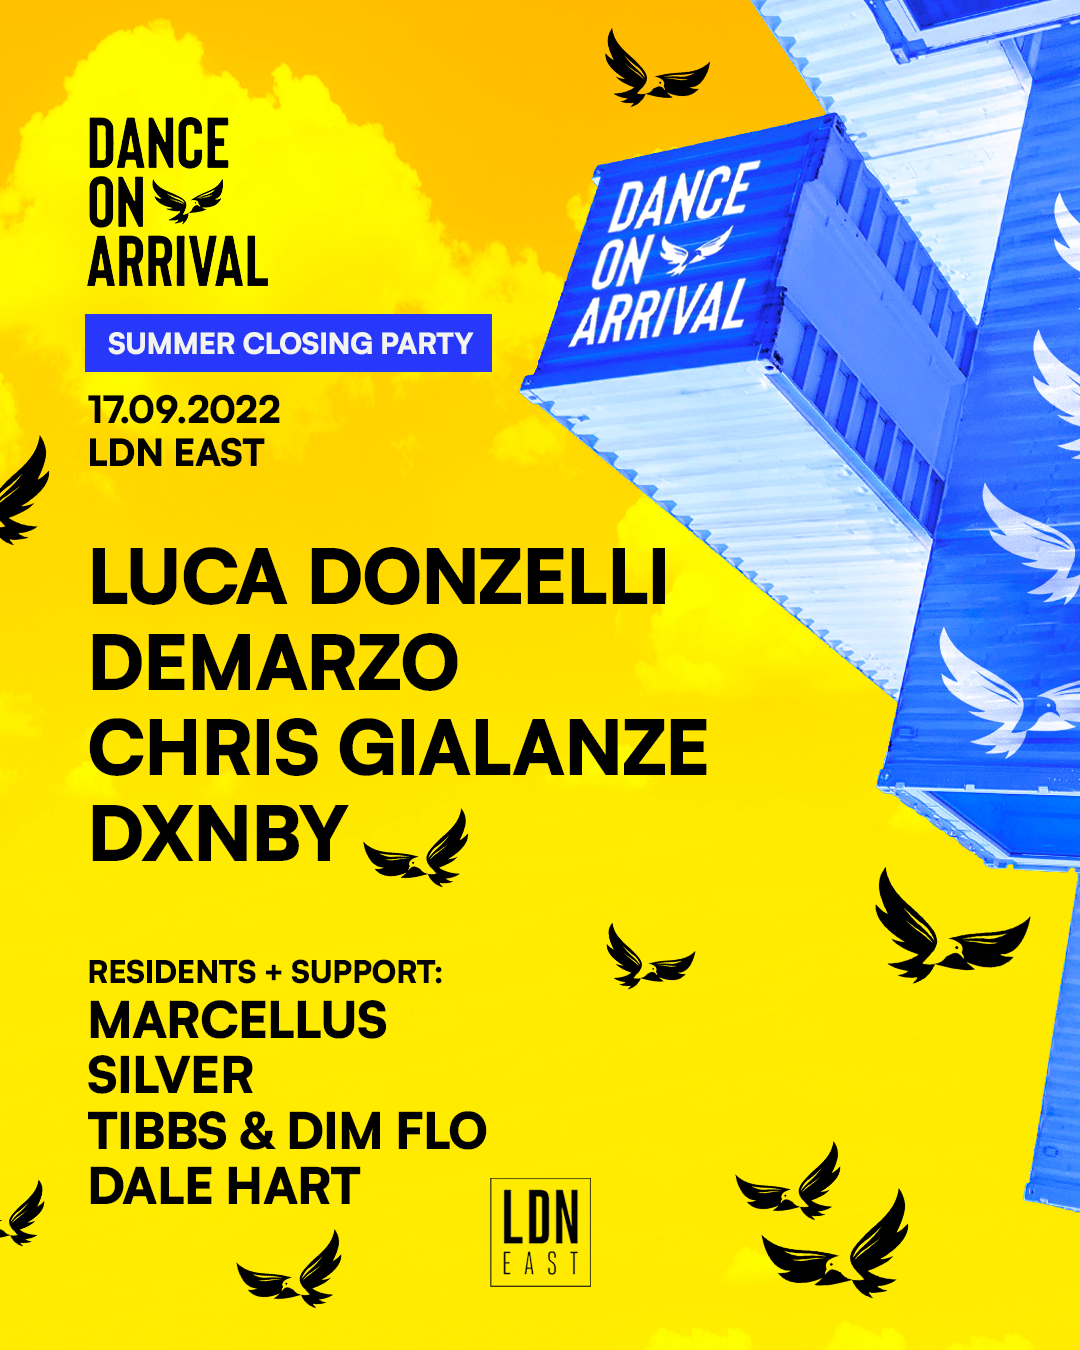 DanceOnArrival: Summer Closing Party with Luca Donzelli, DeMarzo + DXNBY - フライヤー表